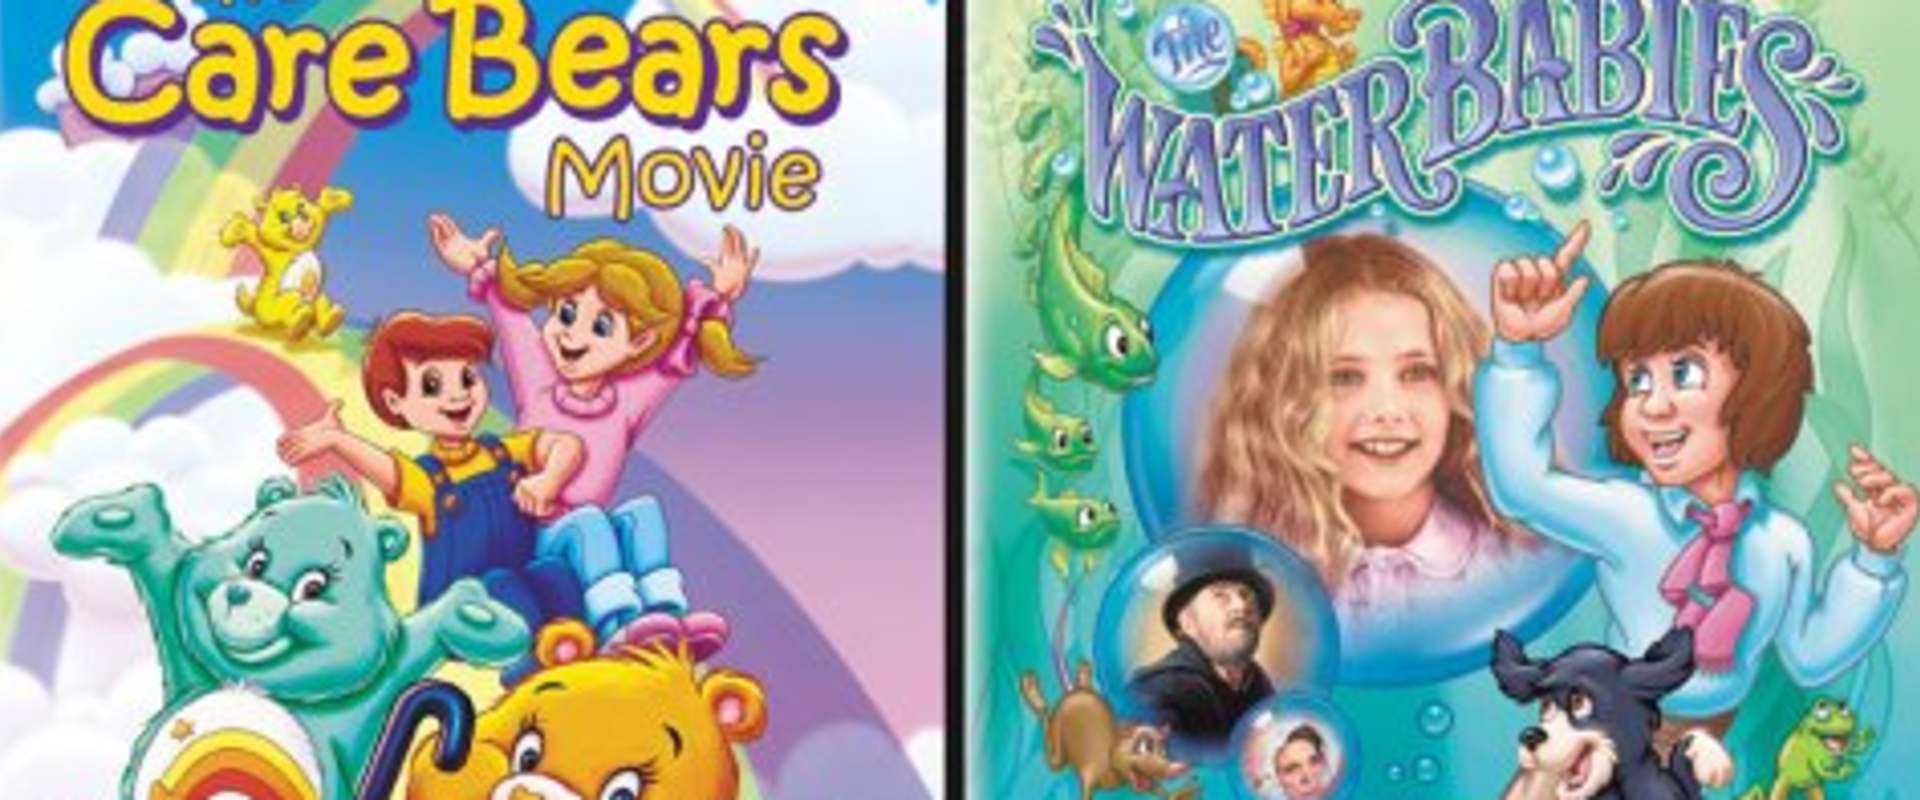 The Care Bears Movie background 2